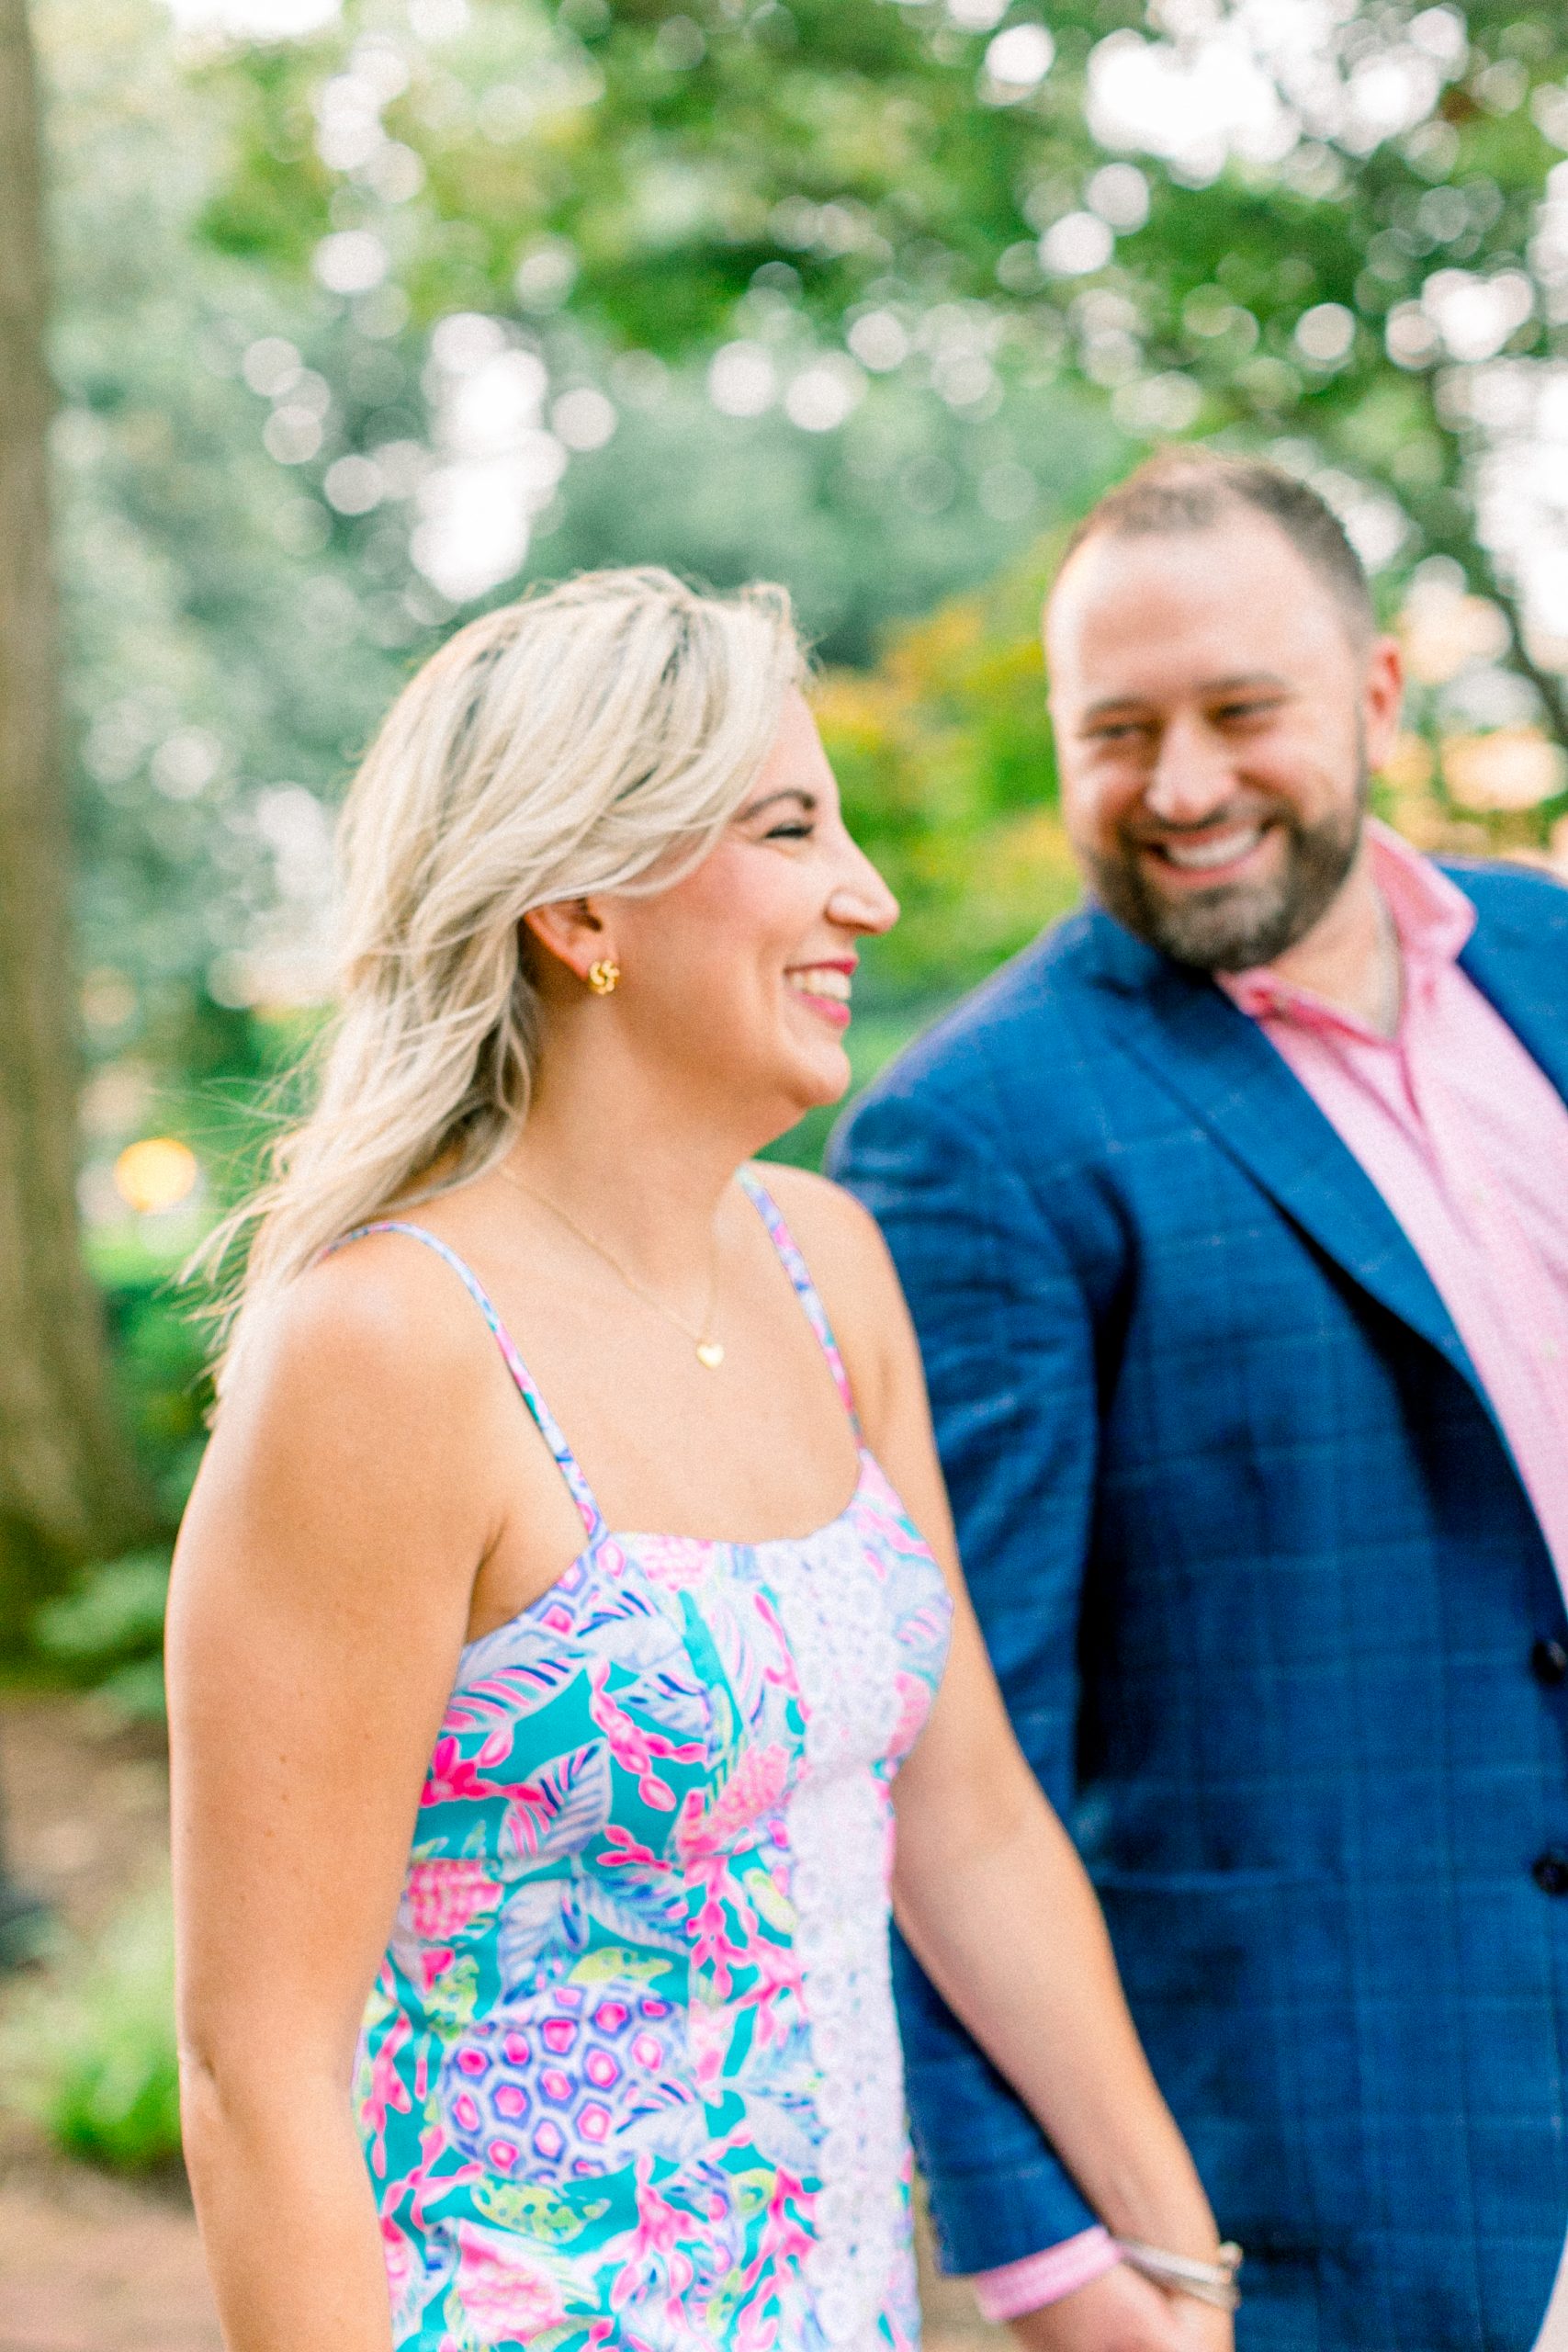 Five Tips so you can have the best Engagement Session